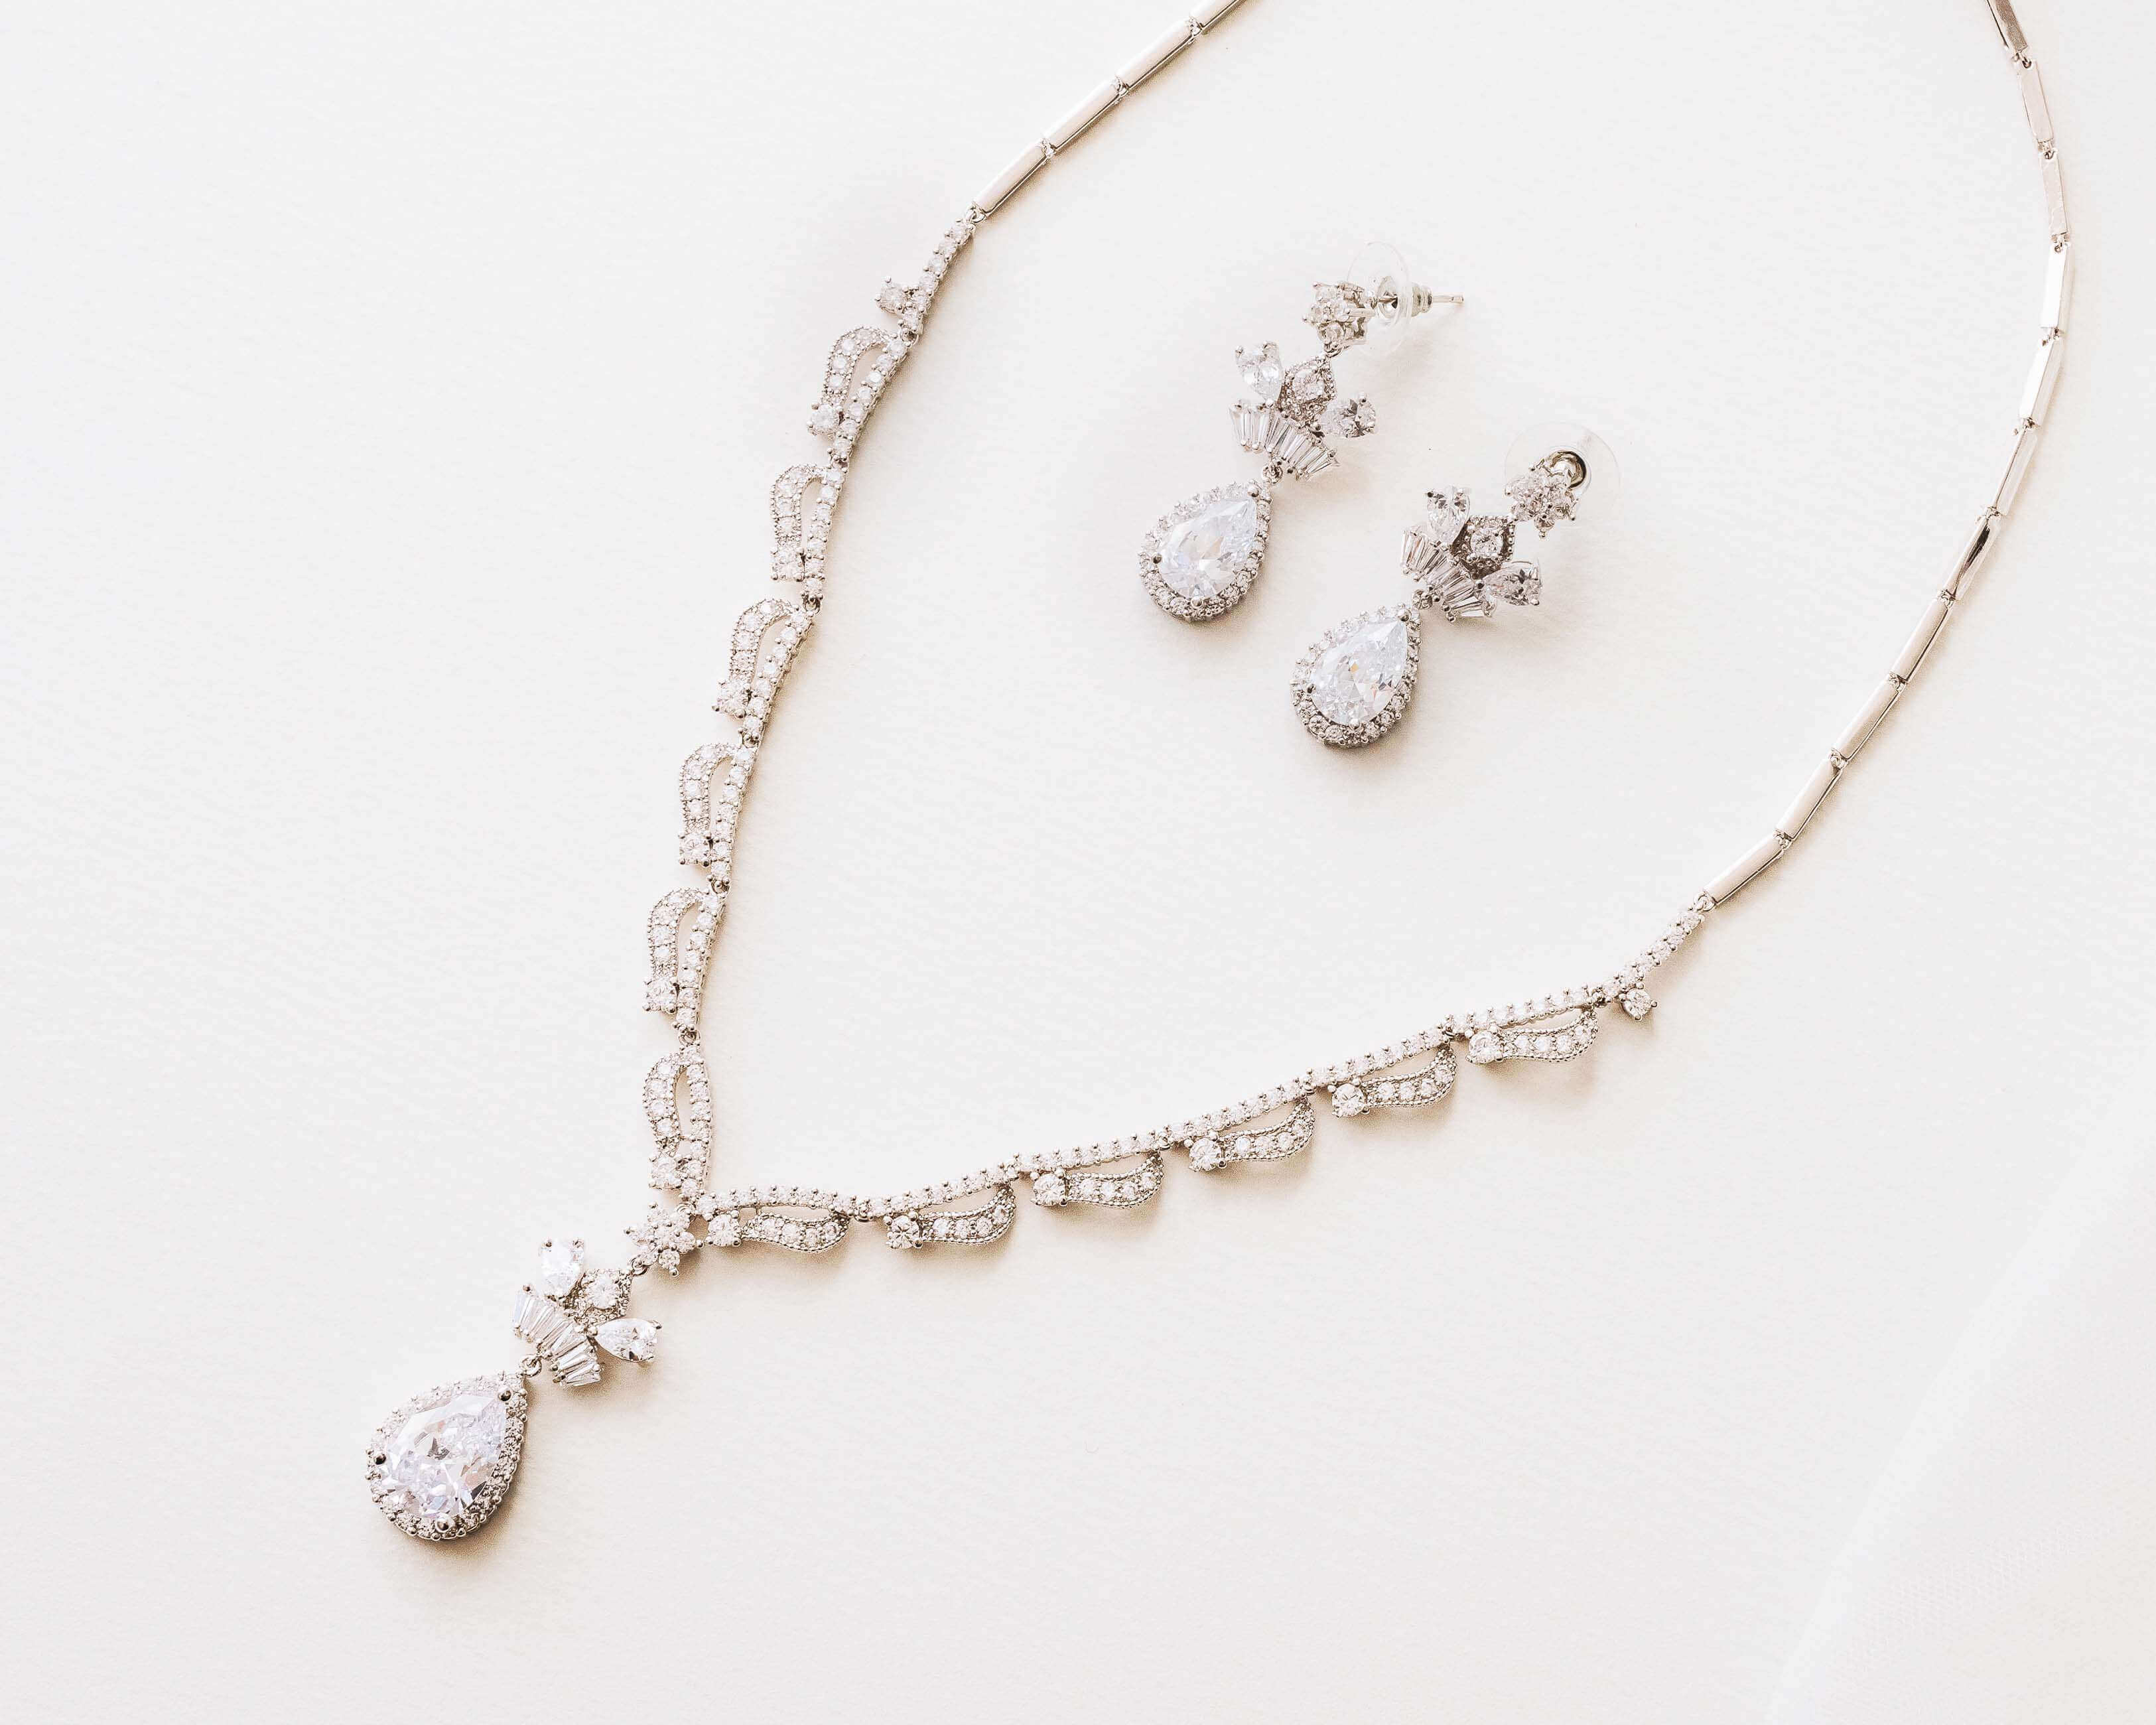 Silver  Crystal Necklace Jewelry Set - The perfect wedding jewelry.